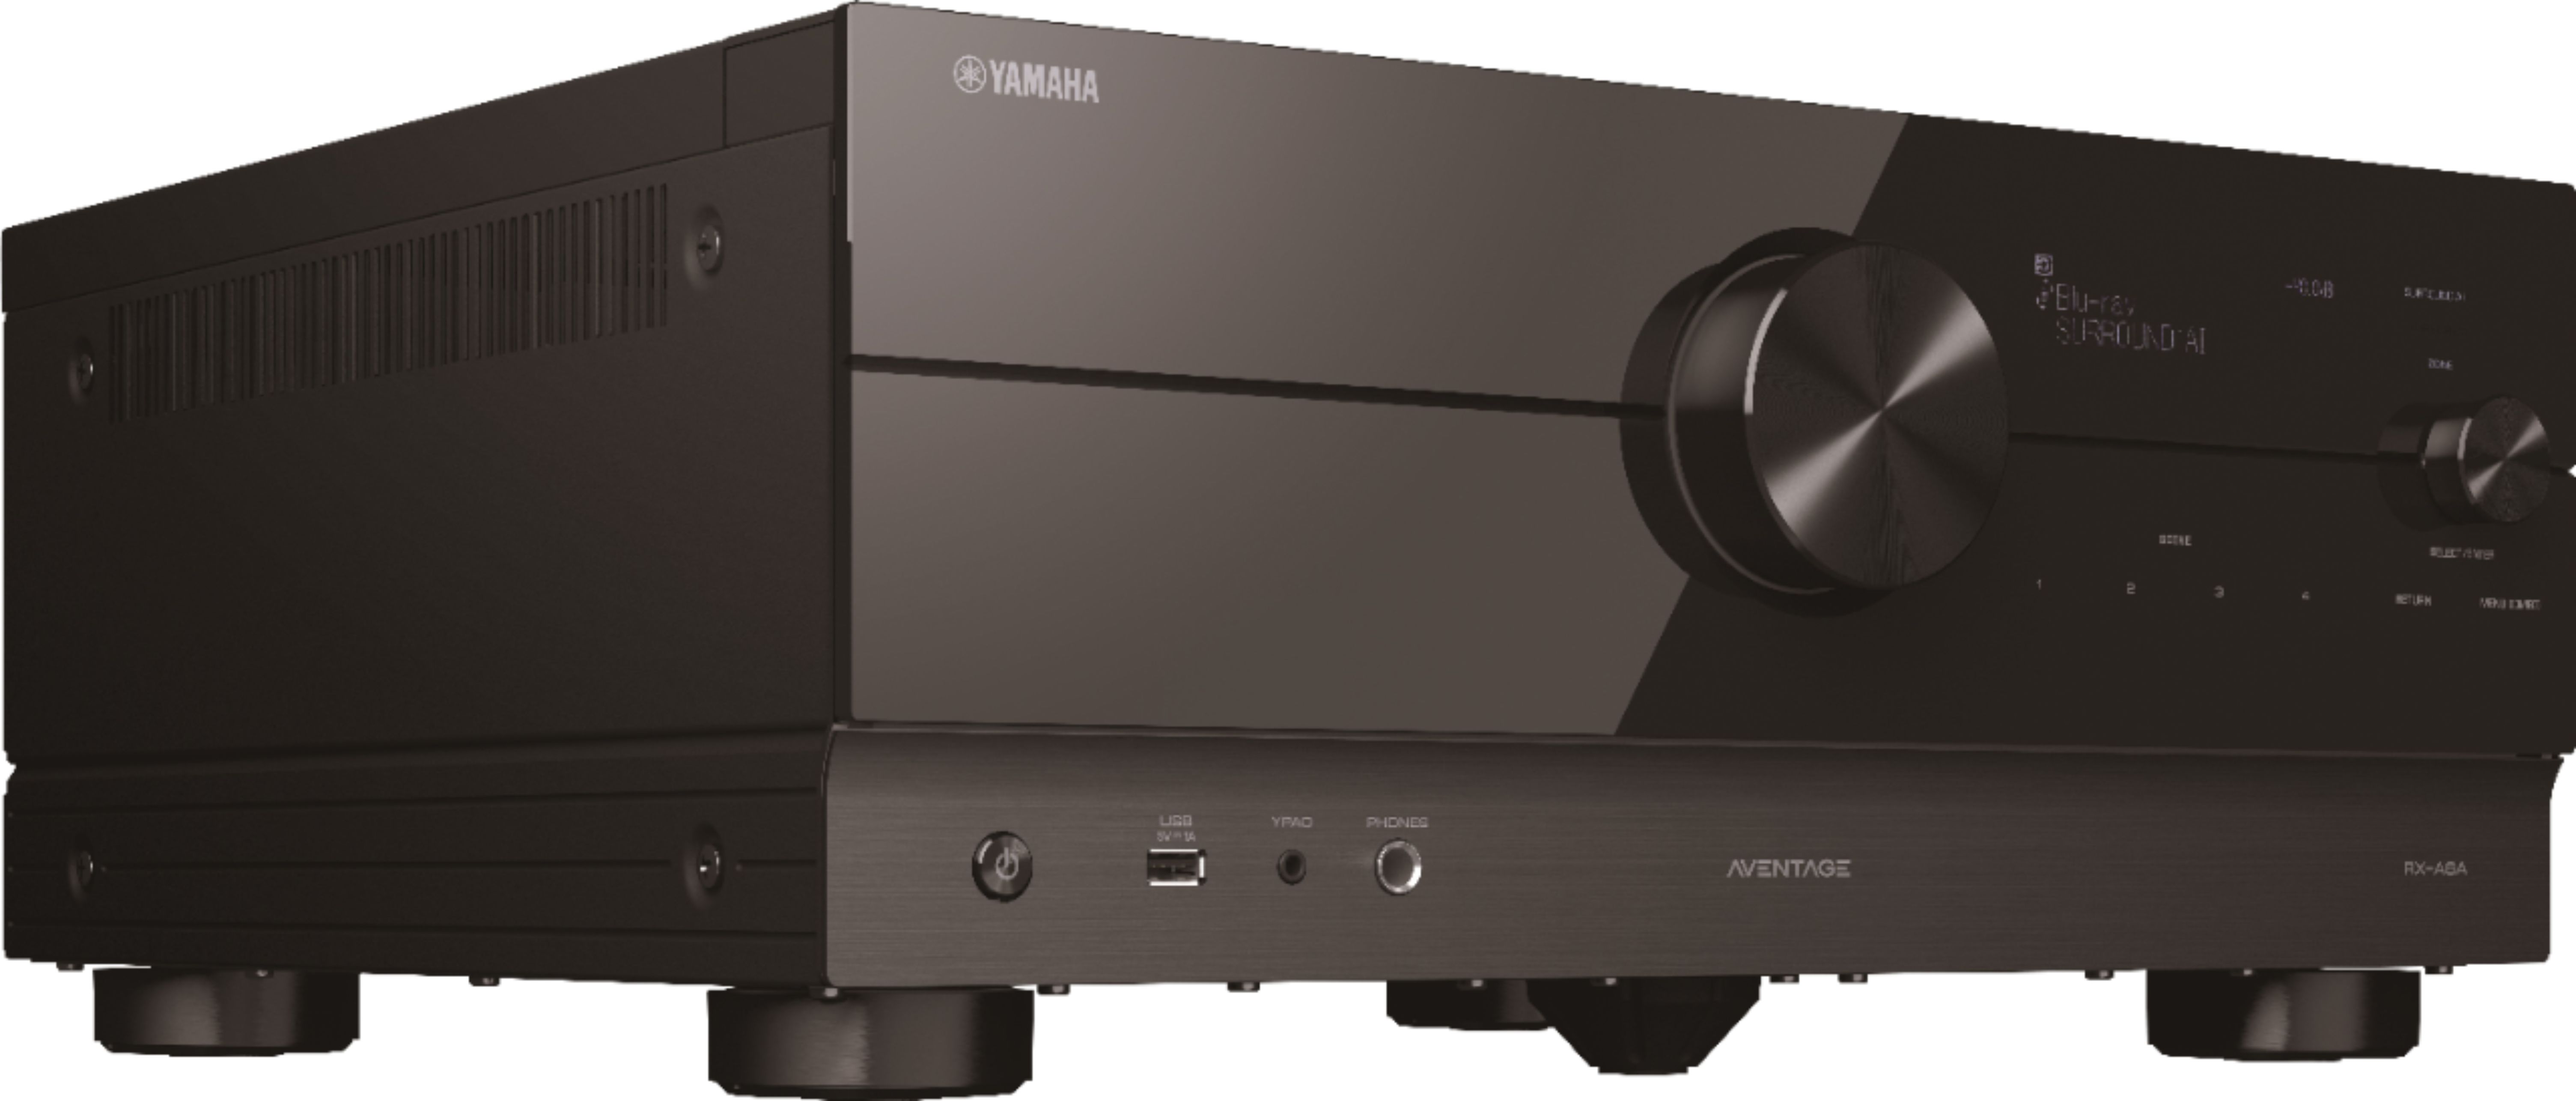 Angle View: Yamaha - AVENTAGE RX-A6A 150W 9.2-Channel AV Receiver with 8K HDMI and MusicCast - Black